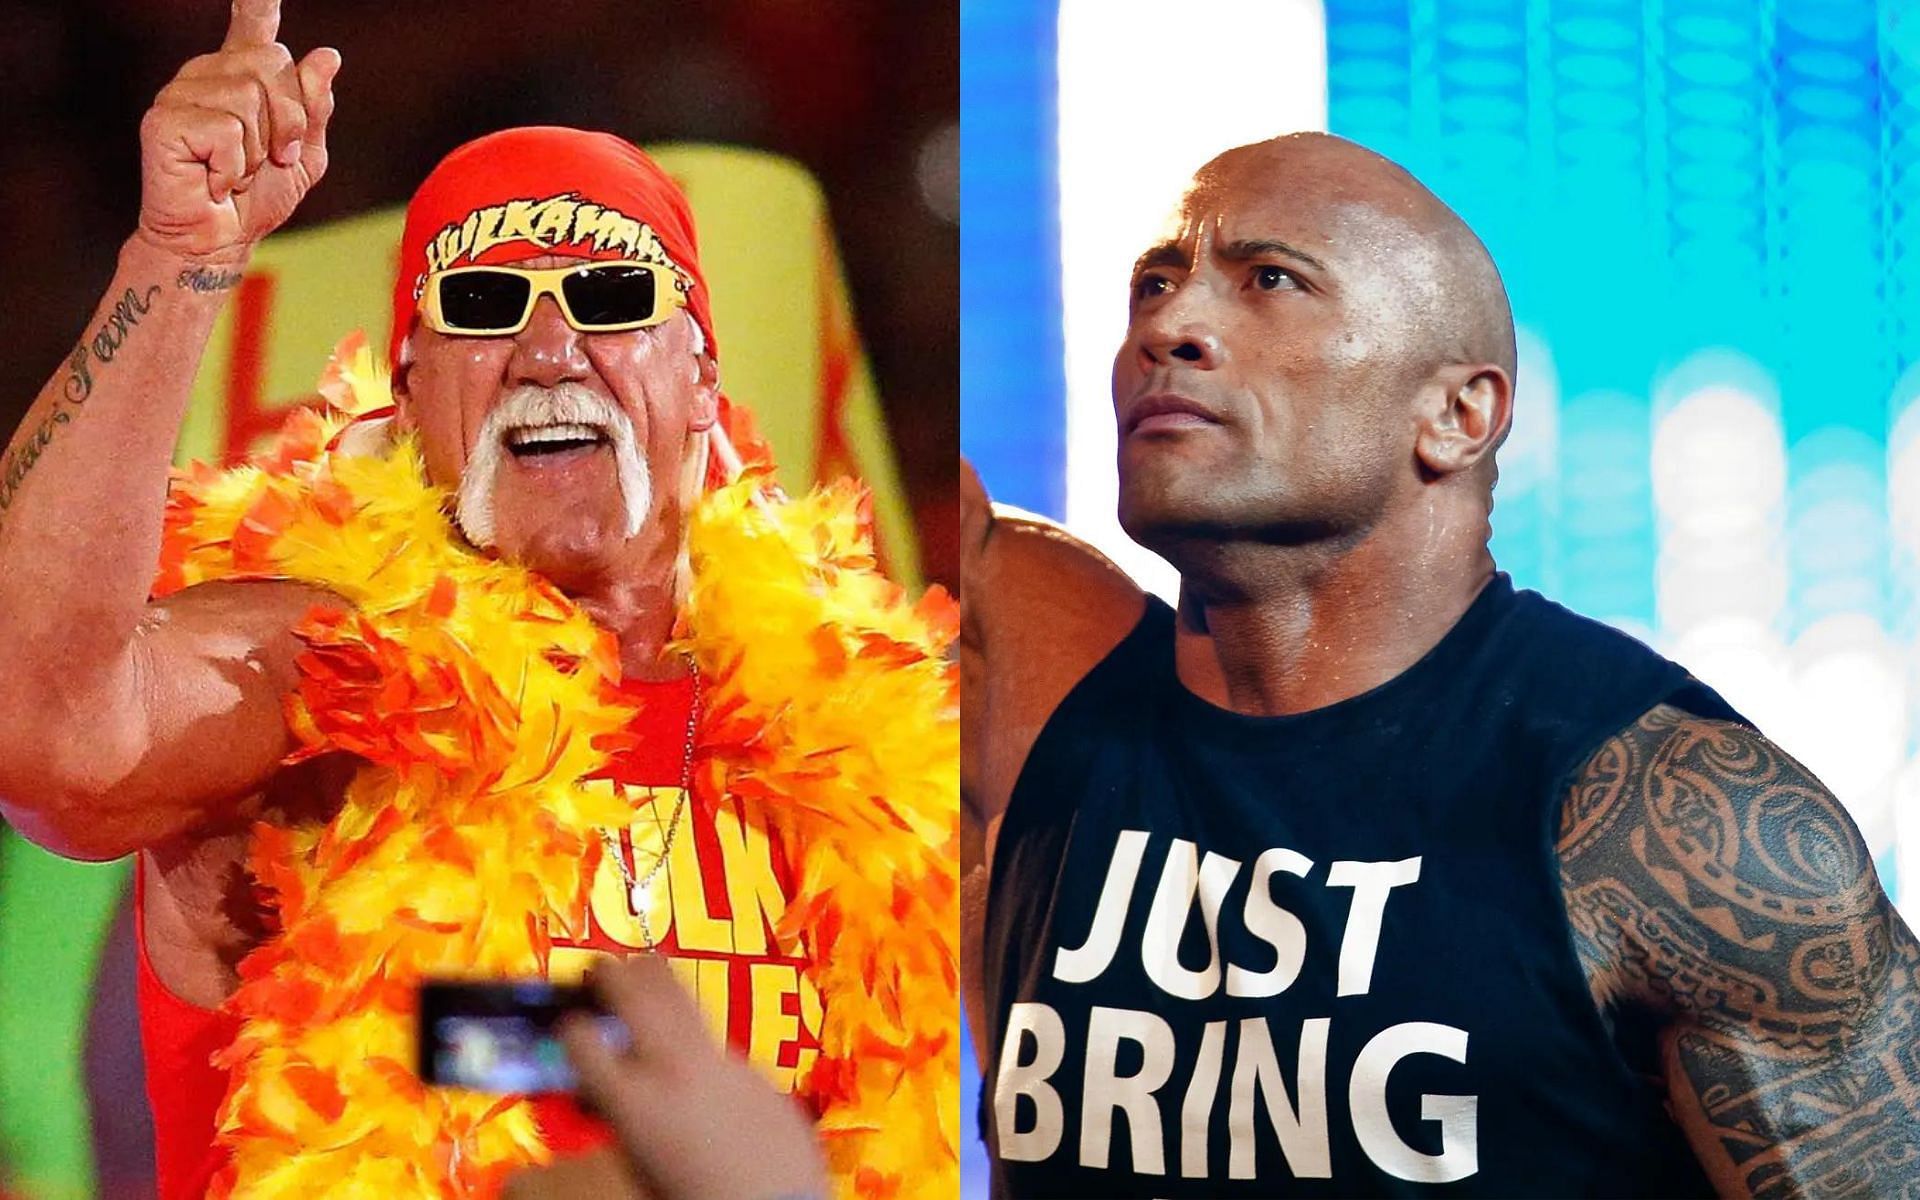 The Immortal Hulk Hogan (Left) and The Great One The Rock (Right)